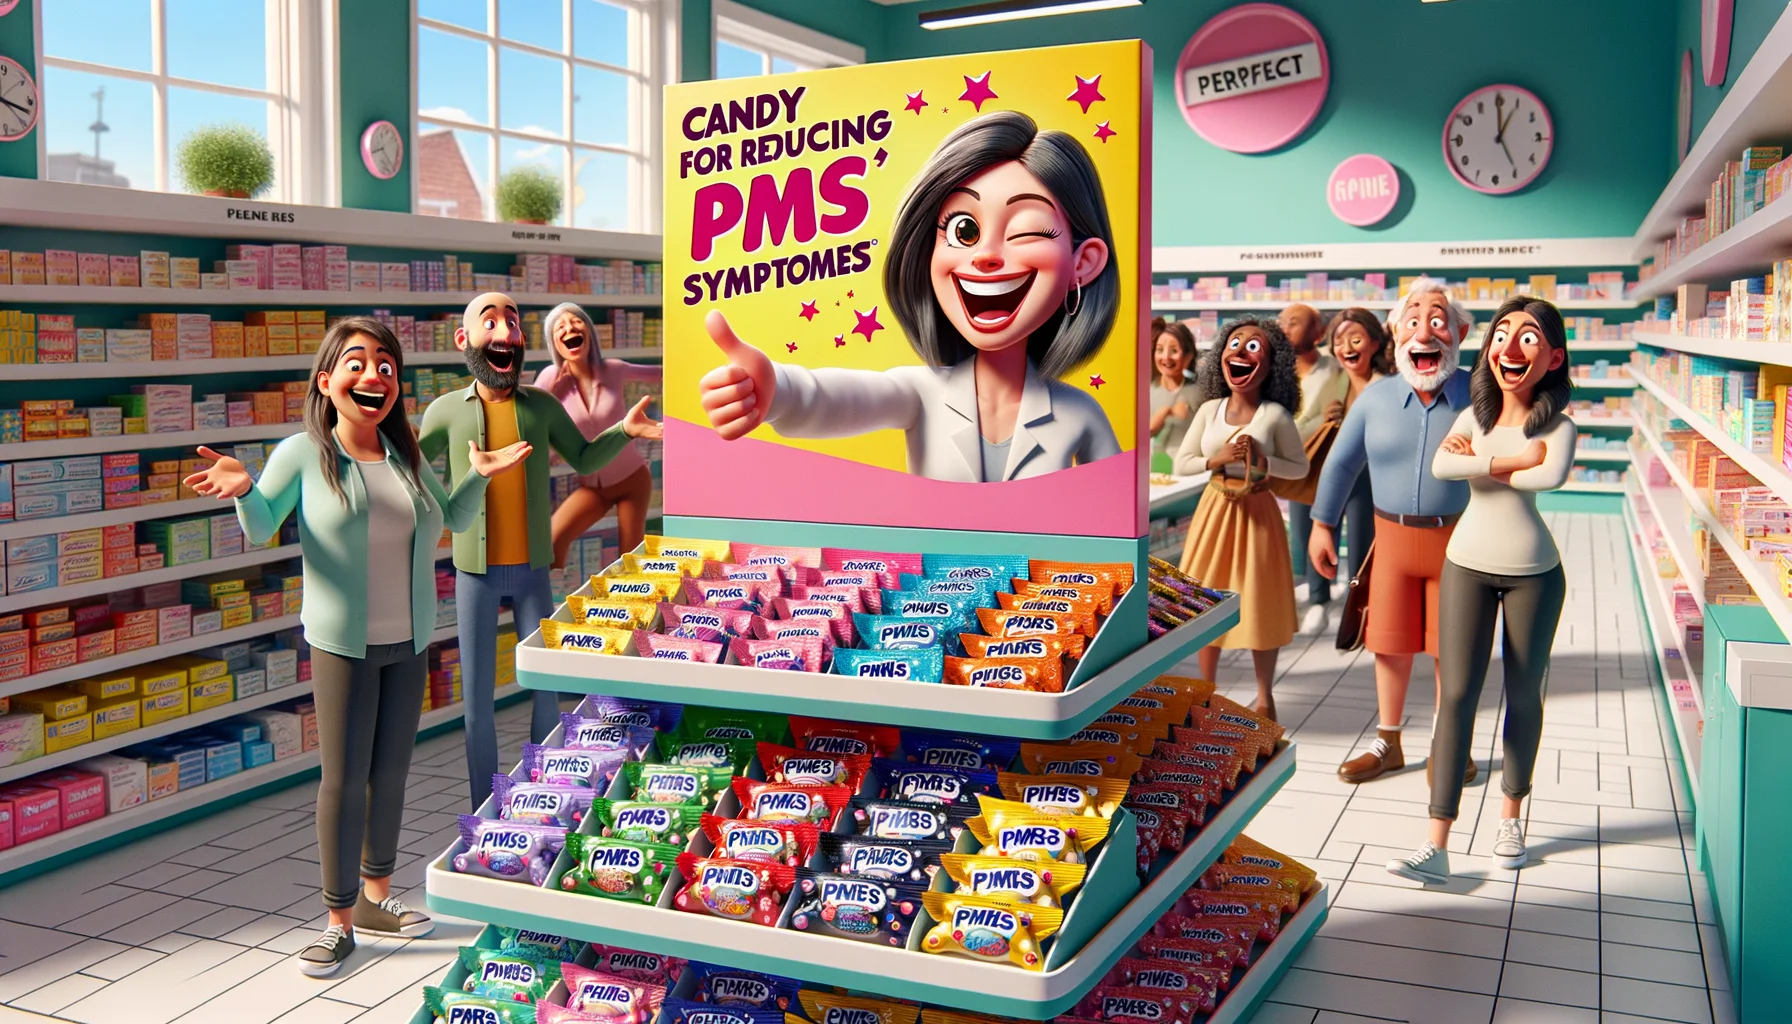 Imagine a humorous yet realistic scene taking place in a brightly lit and cheerful pharmacy. On a prominent display shelf, there's a beautifully packaged product: 'Candy for Reducing PMS Symptoms'. This extraordinary candy is multi-colored, shiny, and comes in various shapes and flavors. The product has a playful logo with a cheerful female cartoon character winking and giving a thumbs-up. The backdrop is a perfect scenario where we see customers, a mix of both men and women of varying descents including Caucasian, Hispanic, and Black individuals, laughing and pointing at the product with amused expressions. The atmosphere is light-hearted and full of delight.